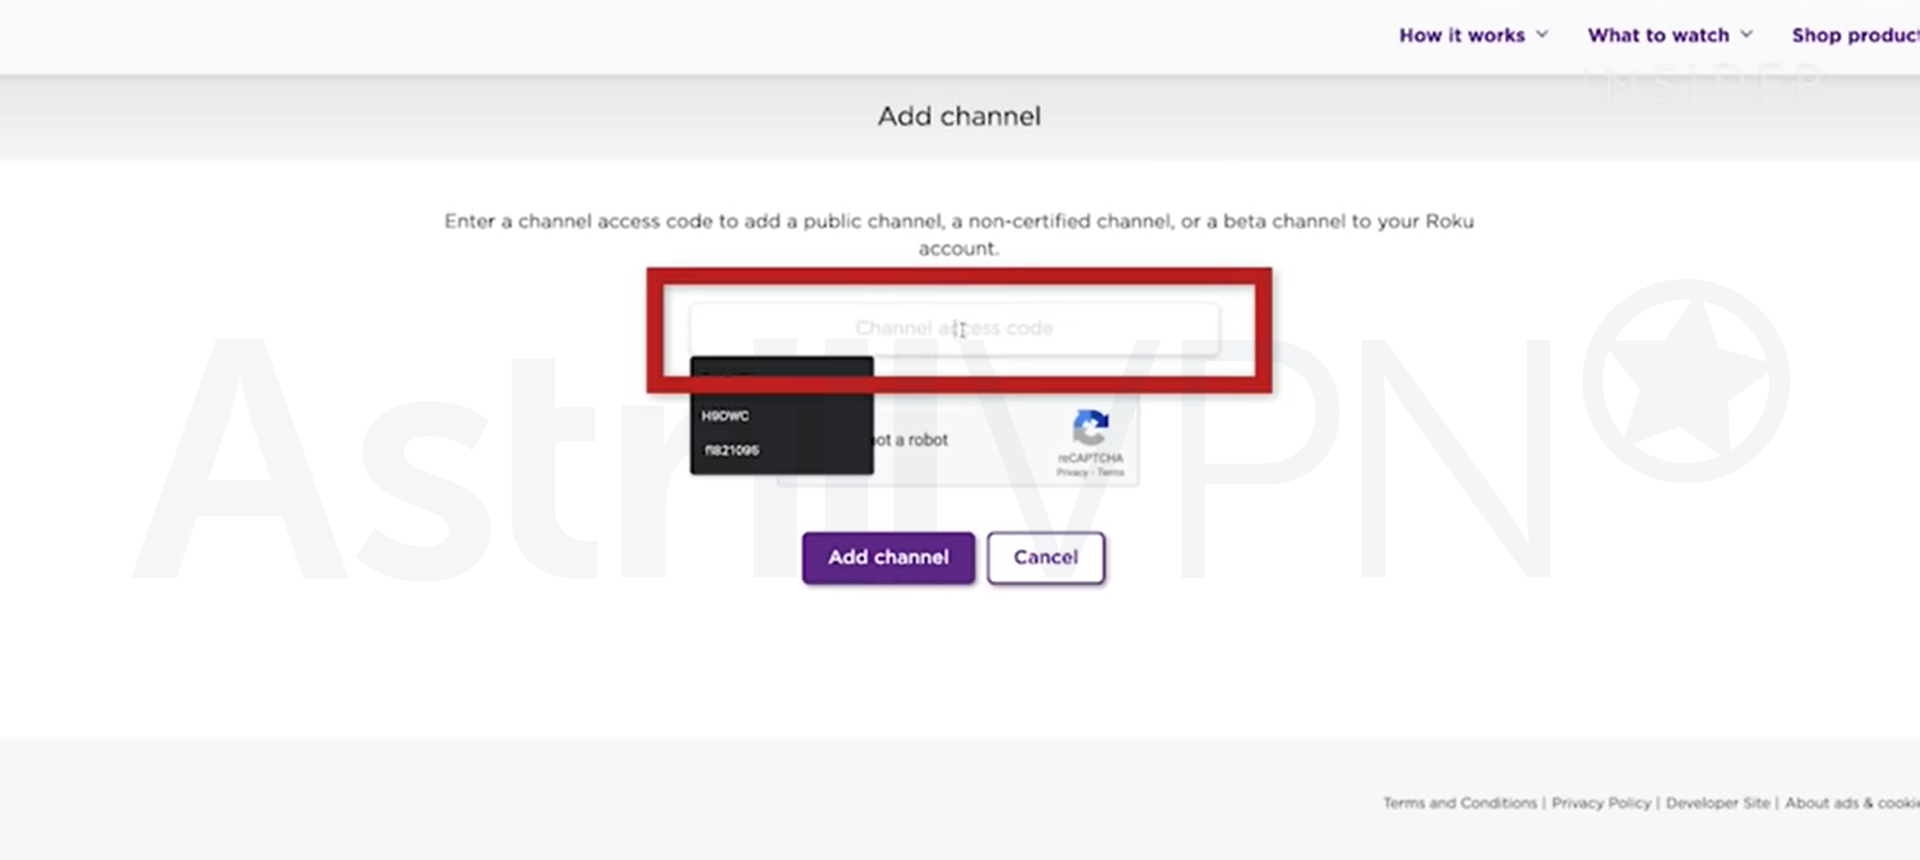 Type the channel access code